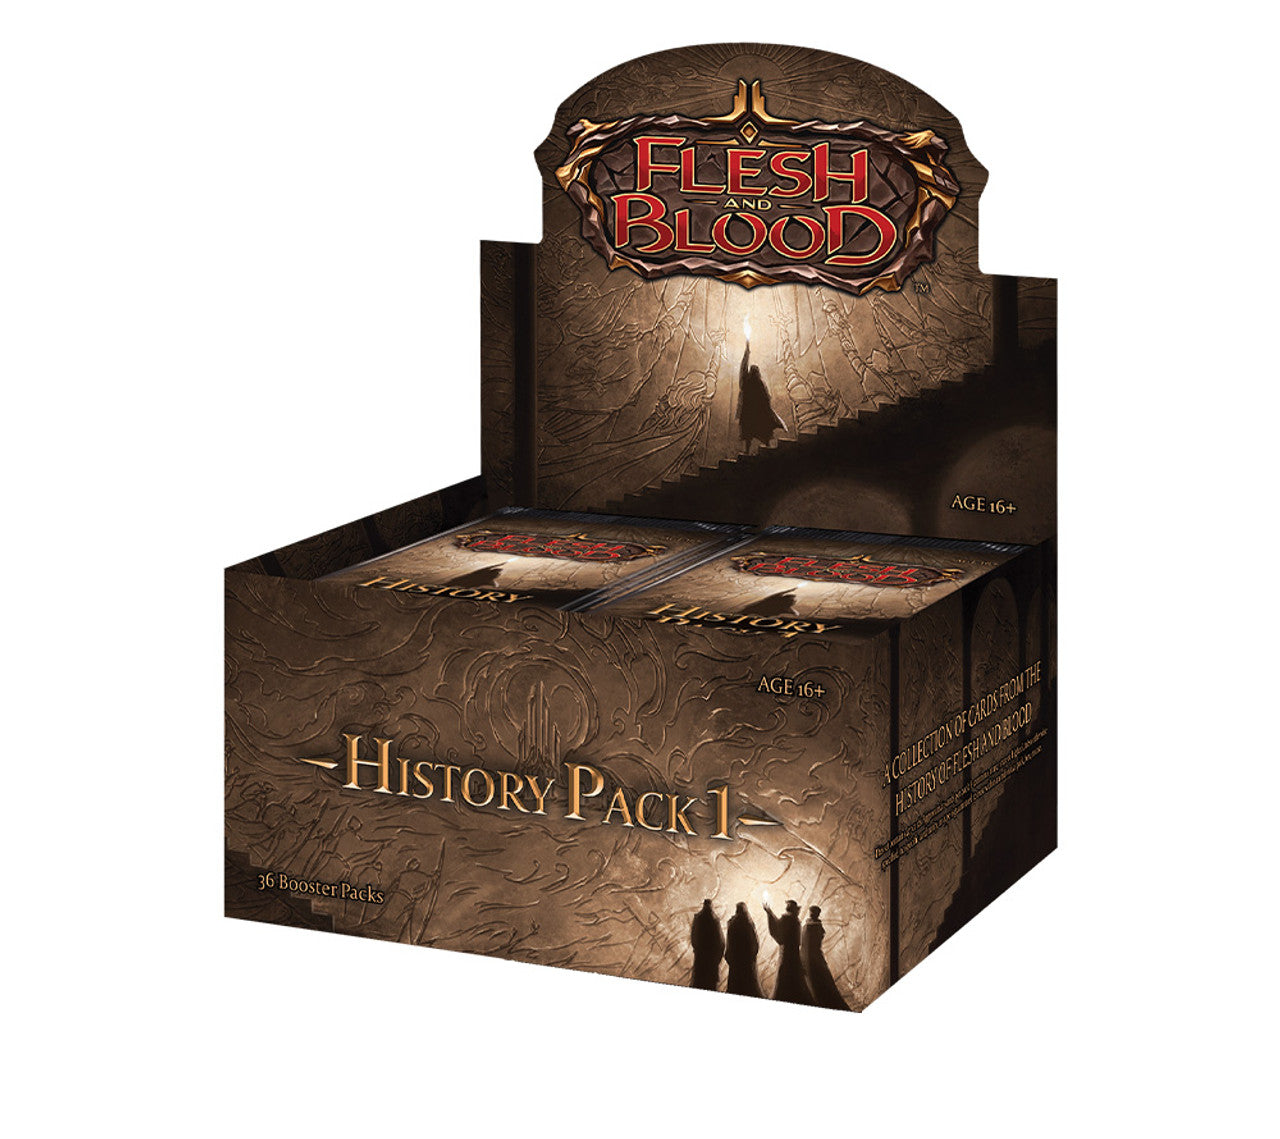 Flesh And Blood - History Pack 1 - Booster Pack (10 cards)